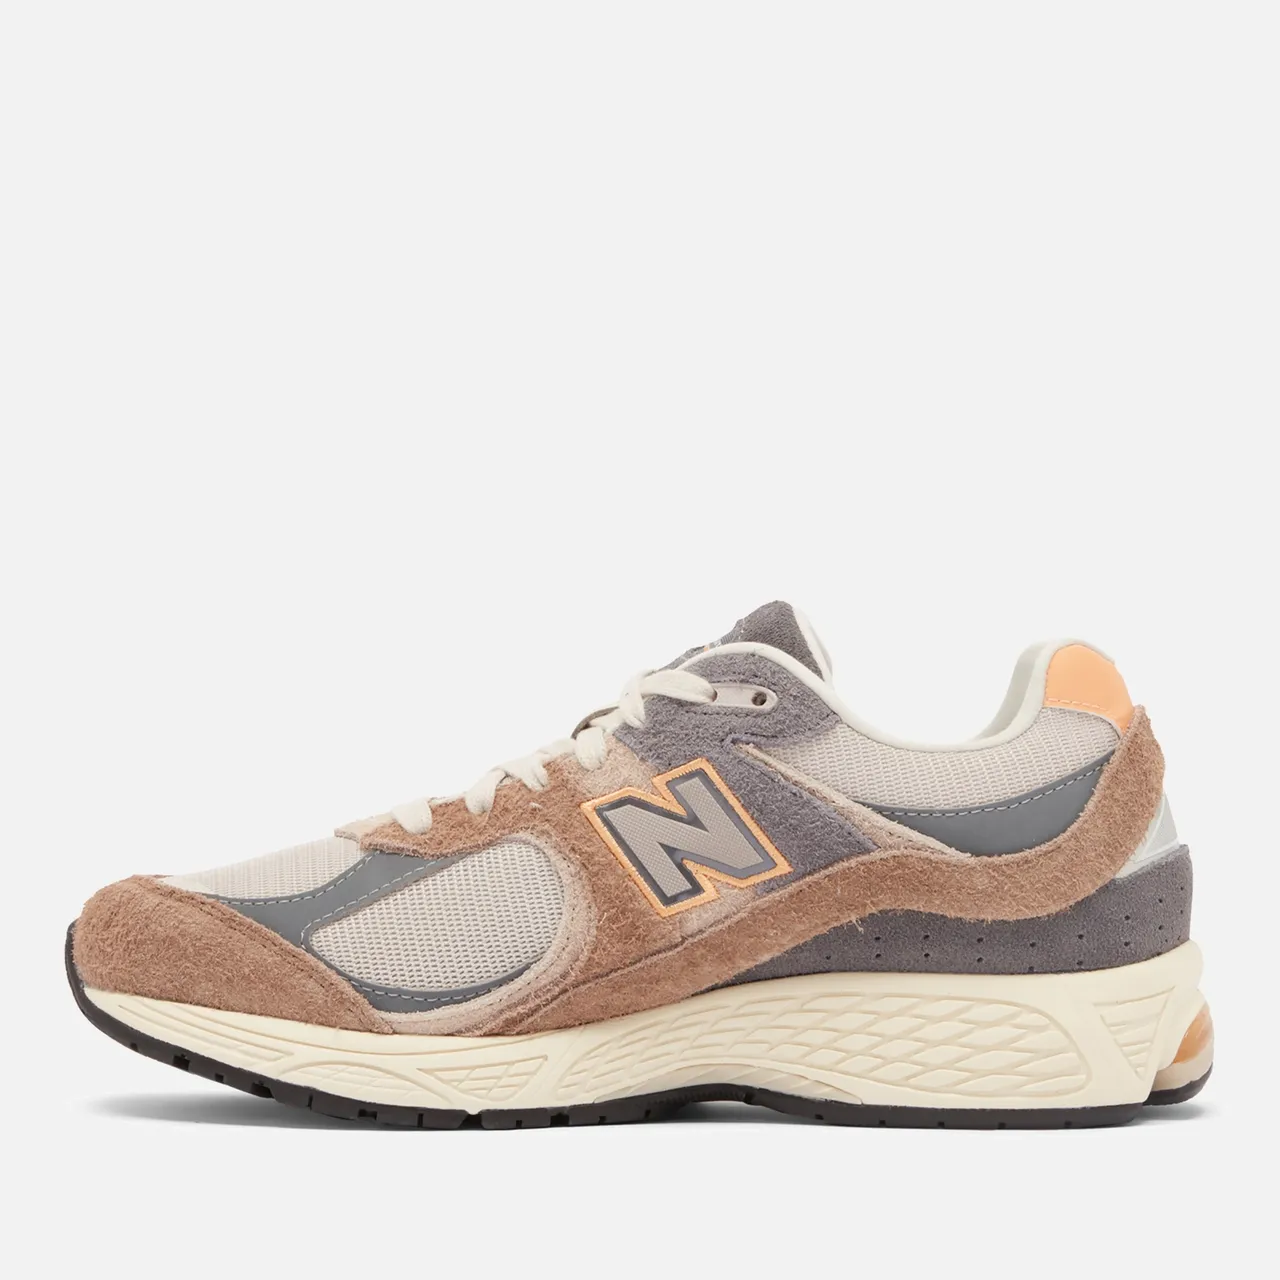 New Balance Men's 2002r Suede and Mesh Trainers